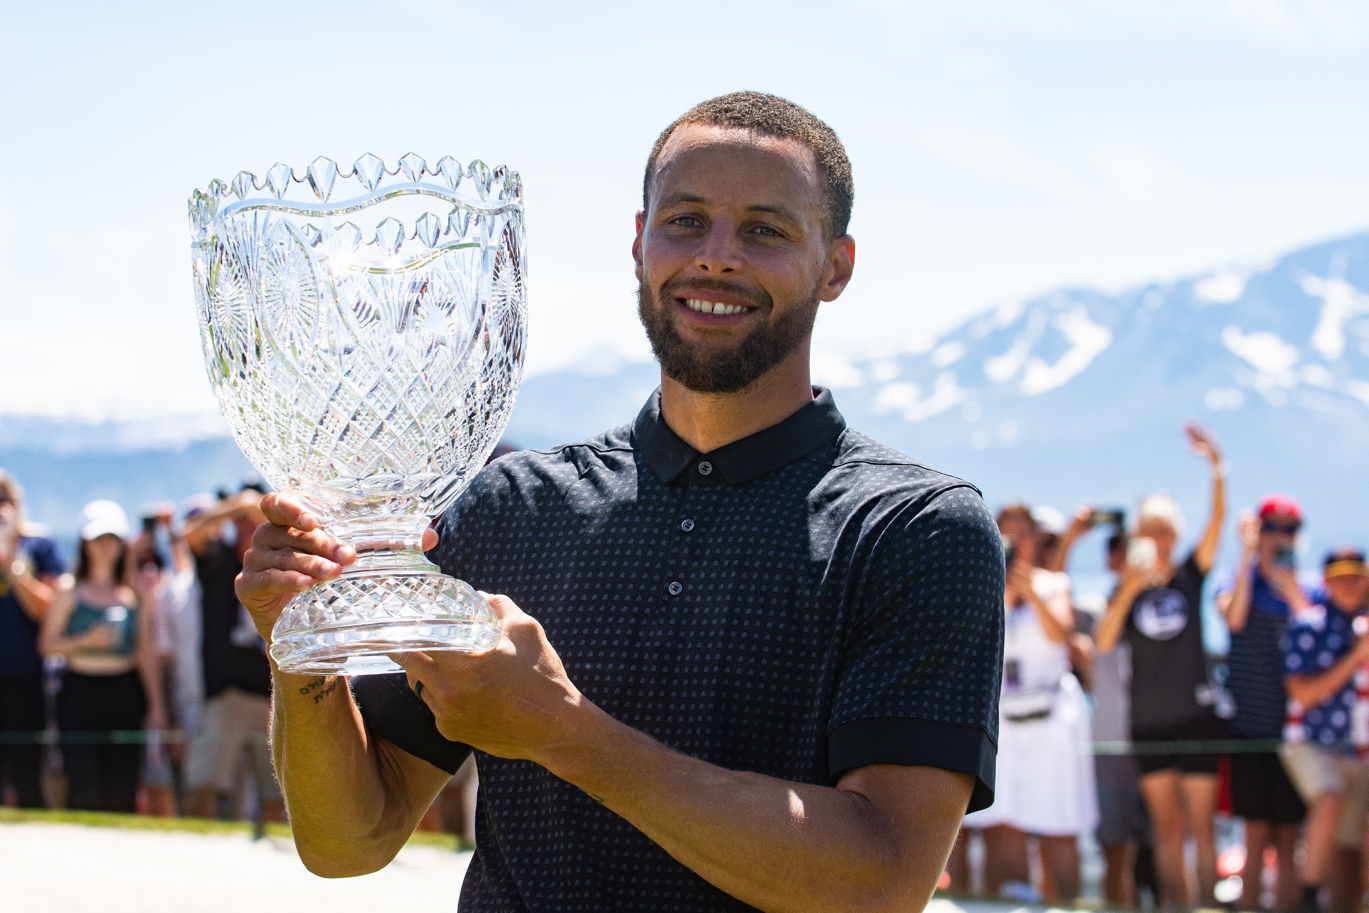 Warriors' Steph Curry aces 7th hole at ACC Championship